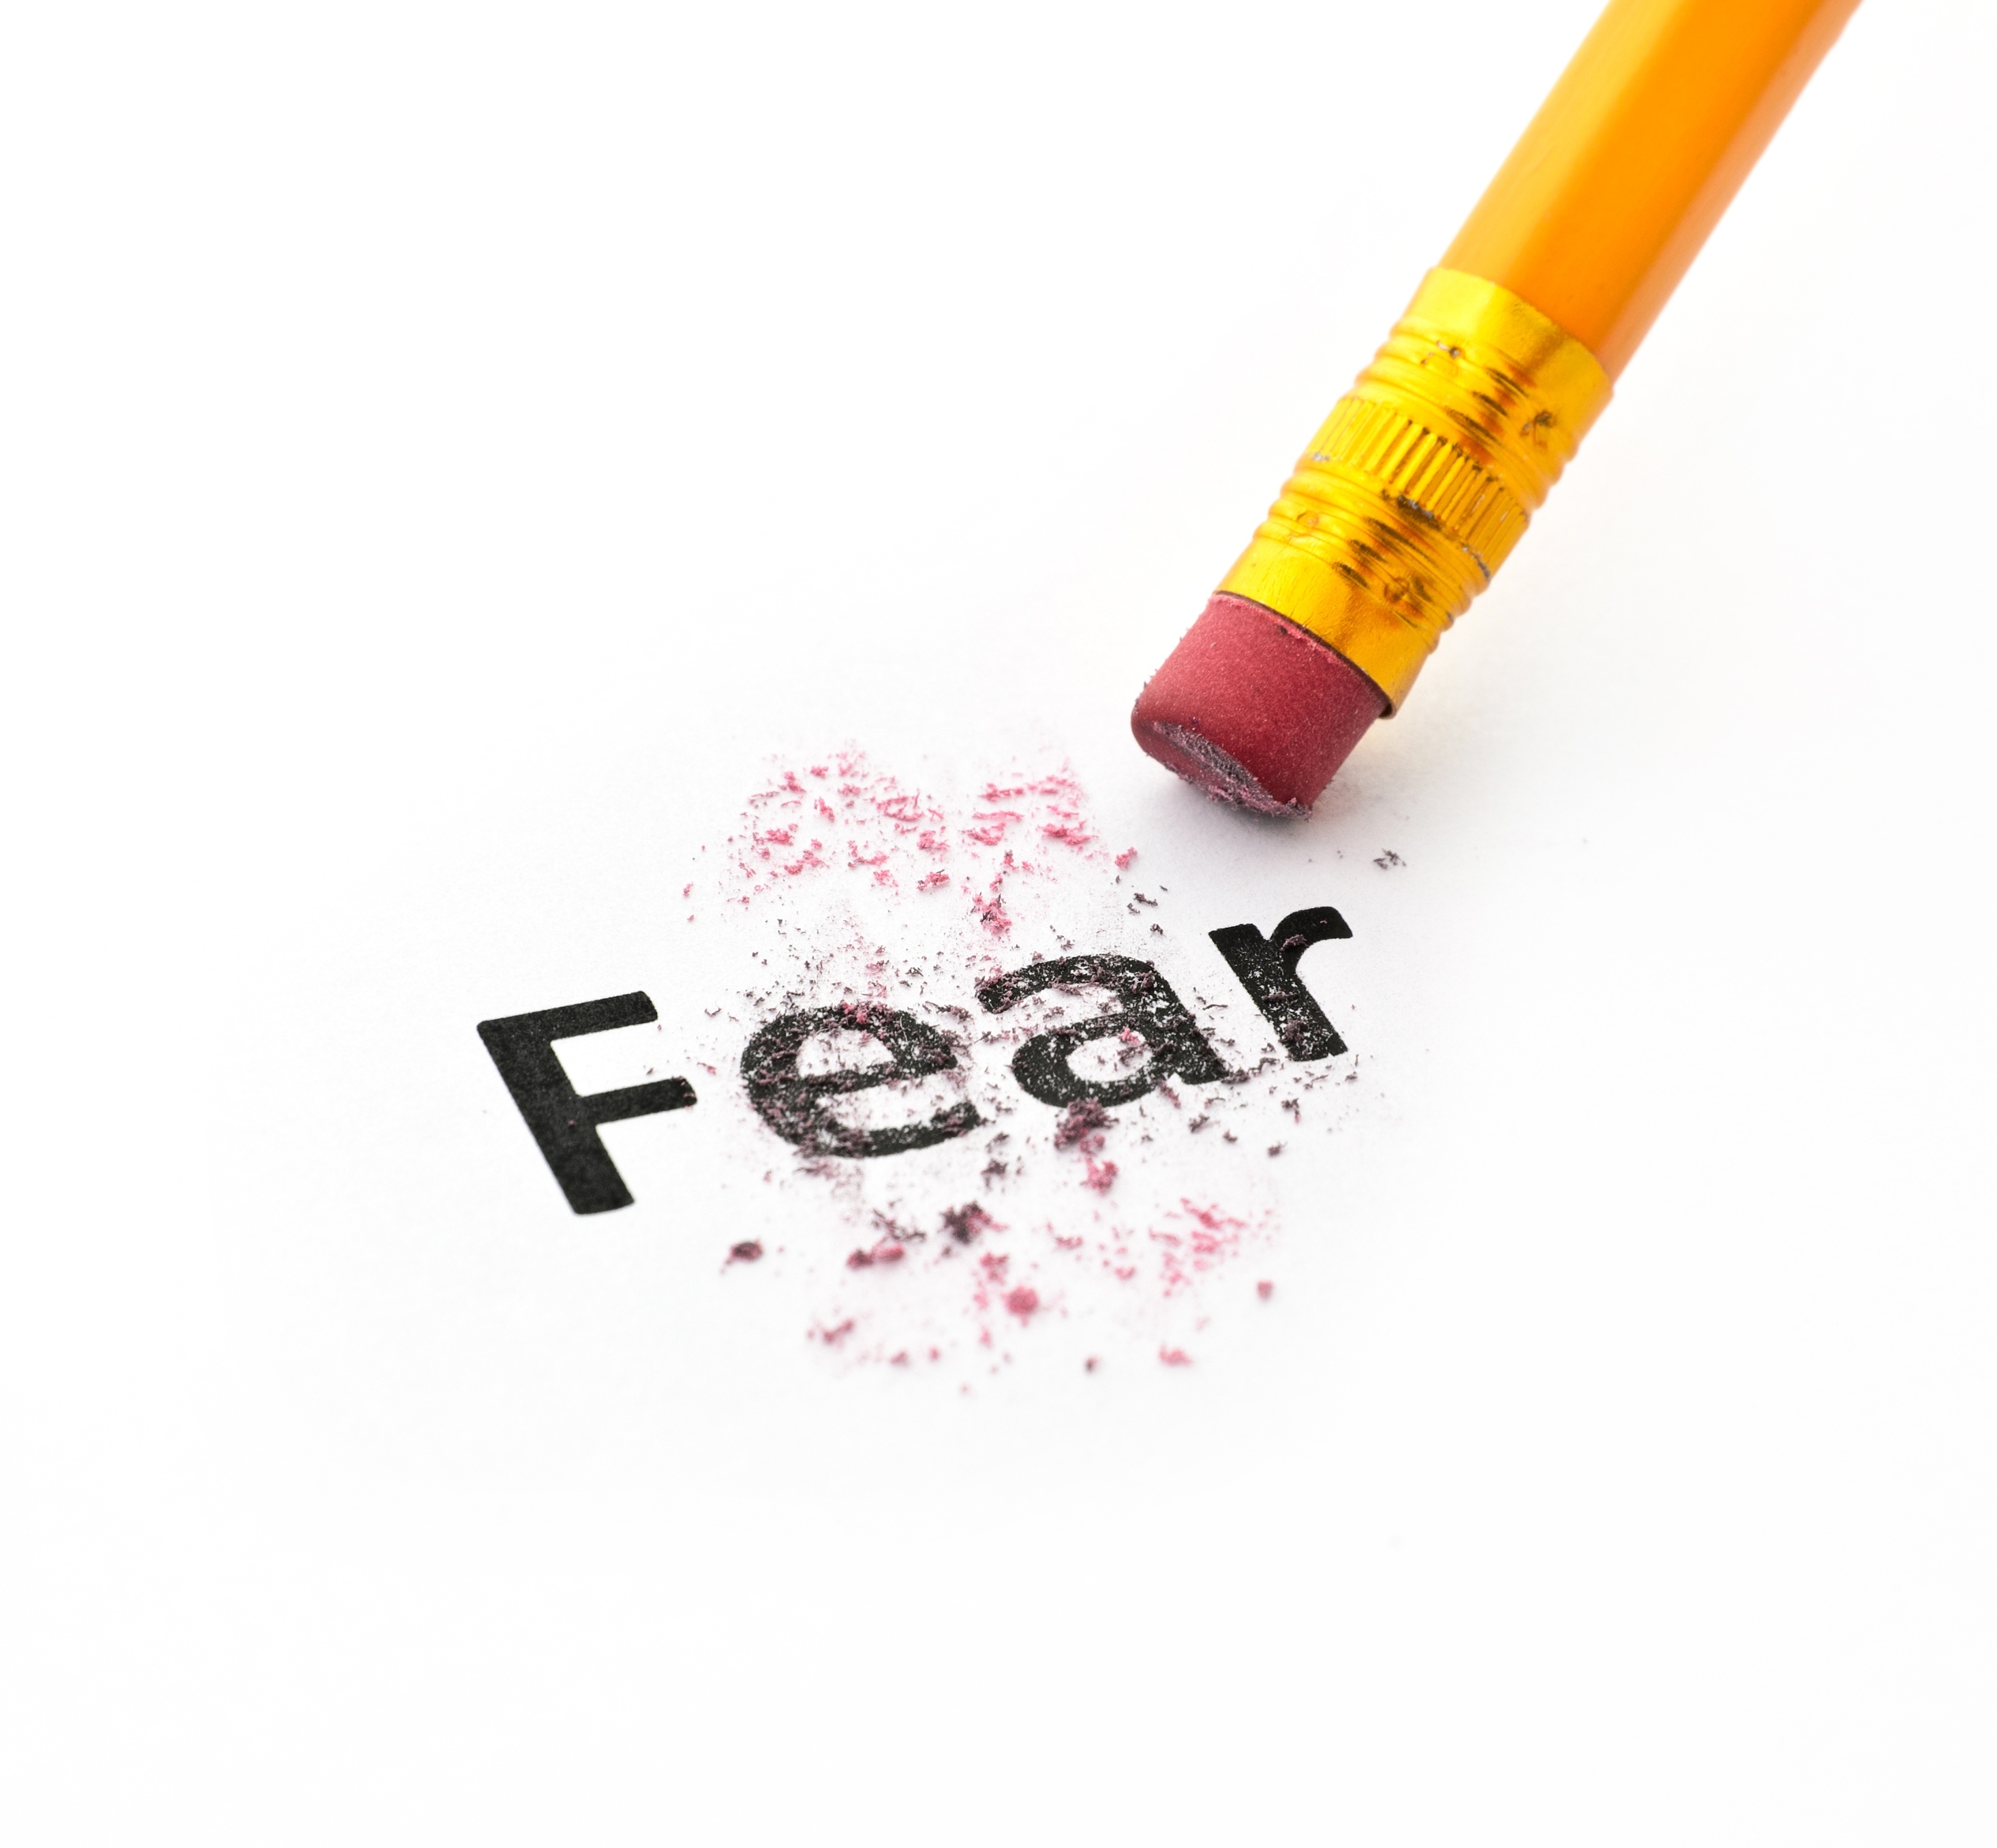 Say Goodbye to “MES Fear” in the New Year